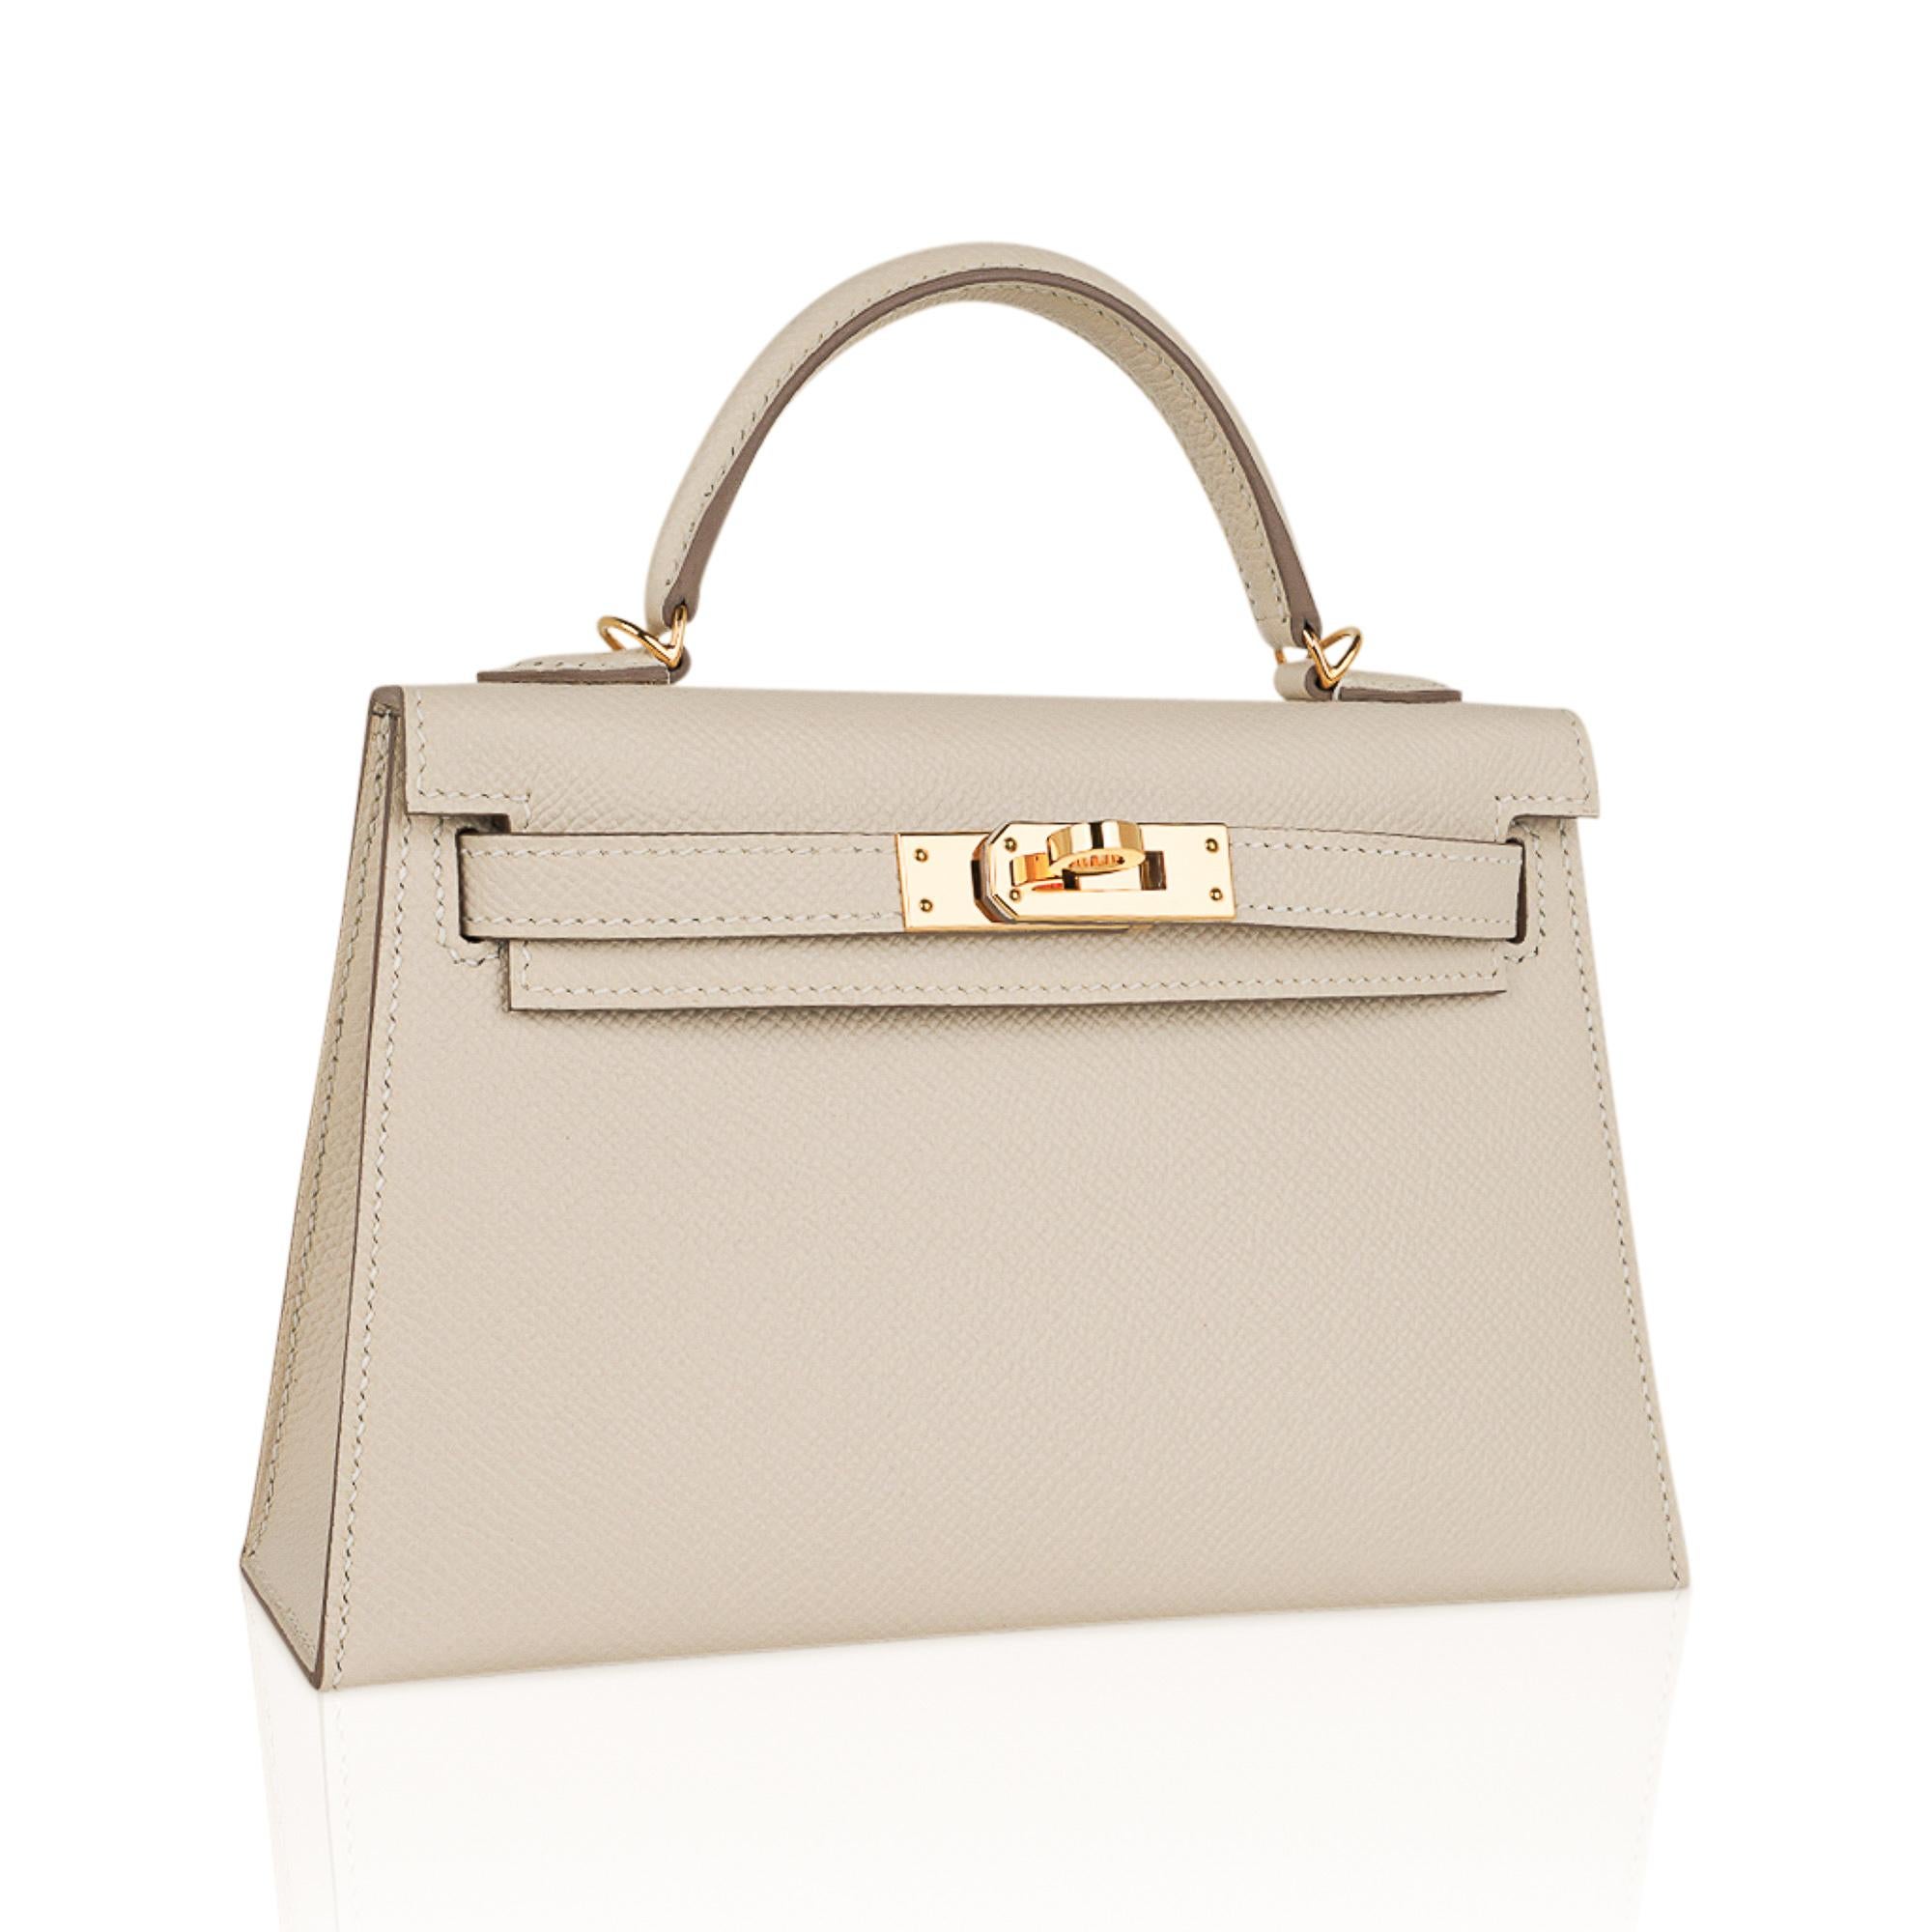 Mightychic offers an Hermes Kelly 20 Mini Sellier bag featured in coveted Craie.
Espom leather accentuated with Gold hardware.
Comes with signature Hermes box, shoulder strap, and sleeper.
Please see the large selection of Kelly 20 bags